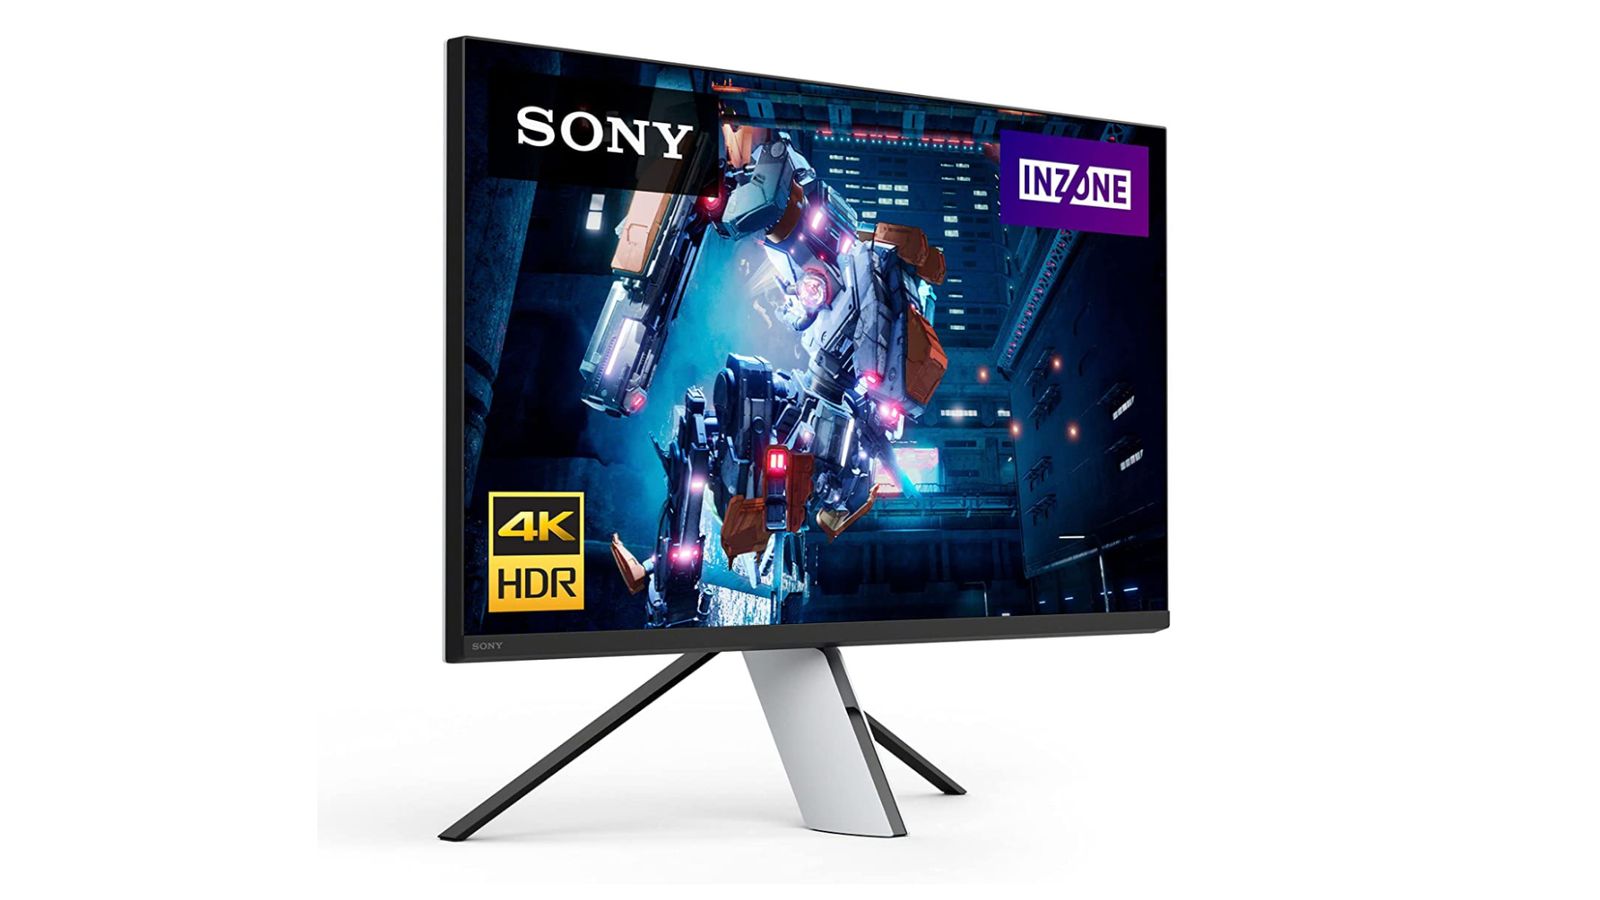 Sony INZONE M9 product image of a silver and grey monitor with an image of a flying robot on the display.